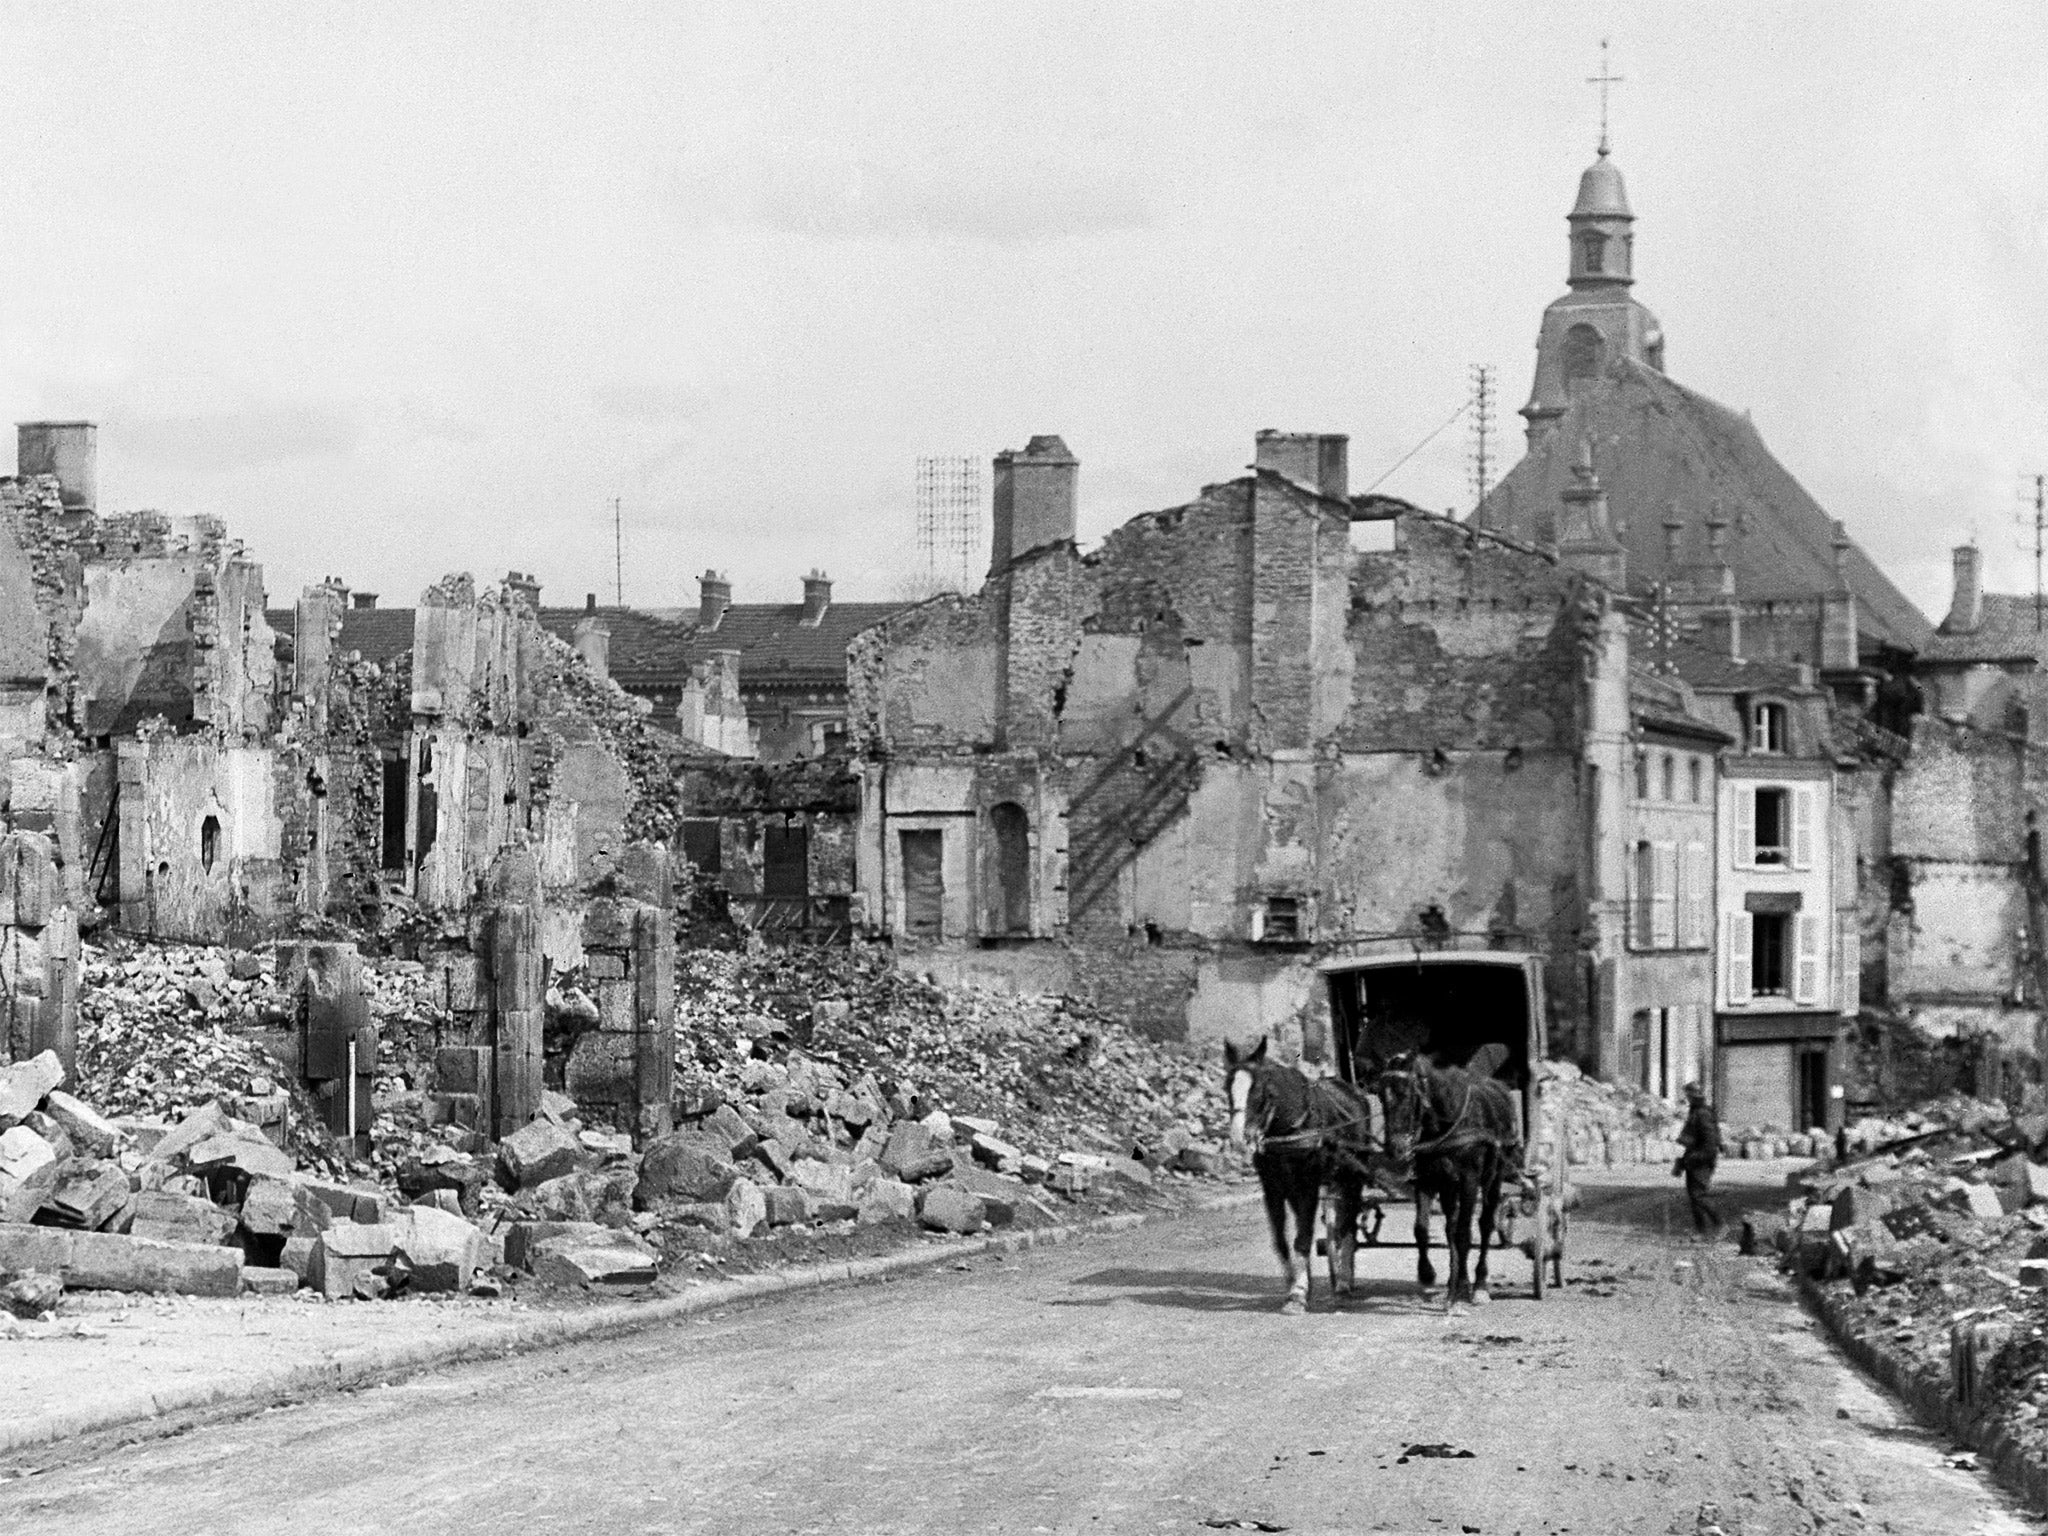 The ruins of the town of Verdun in 1916. The town was rebuilt but the villages on the ridge were declared dead